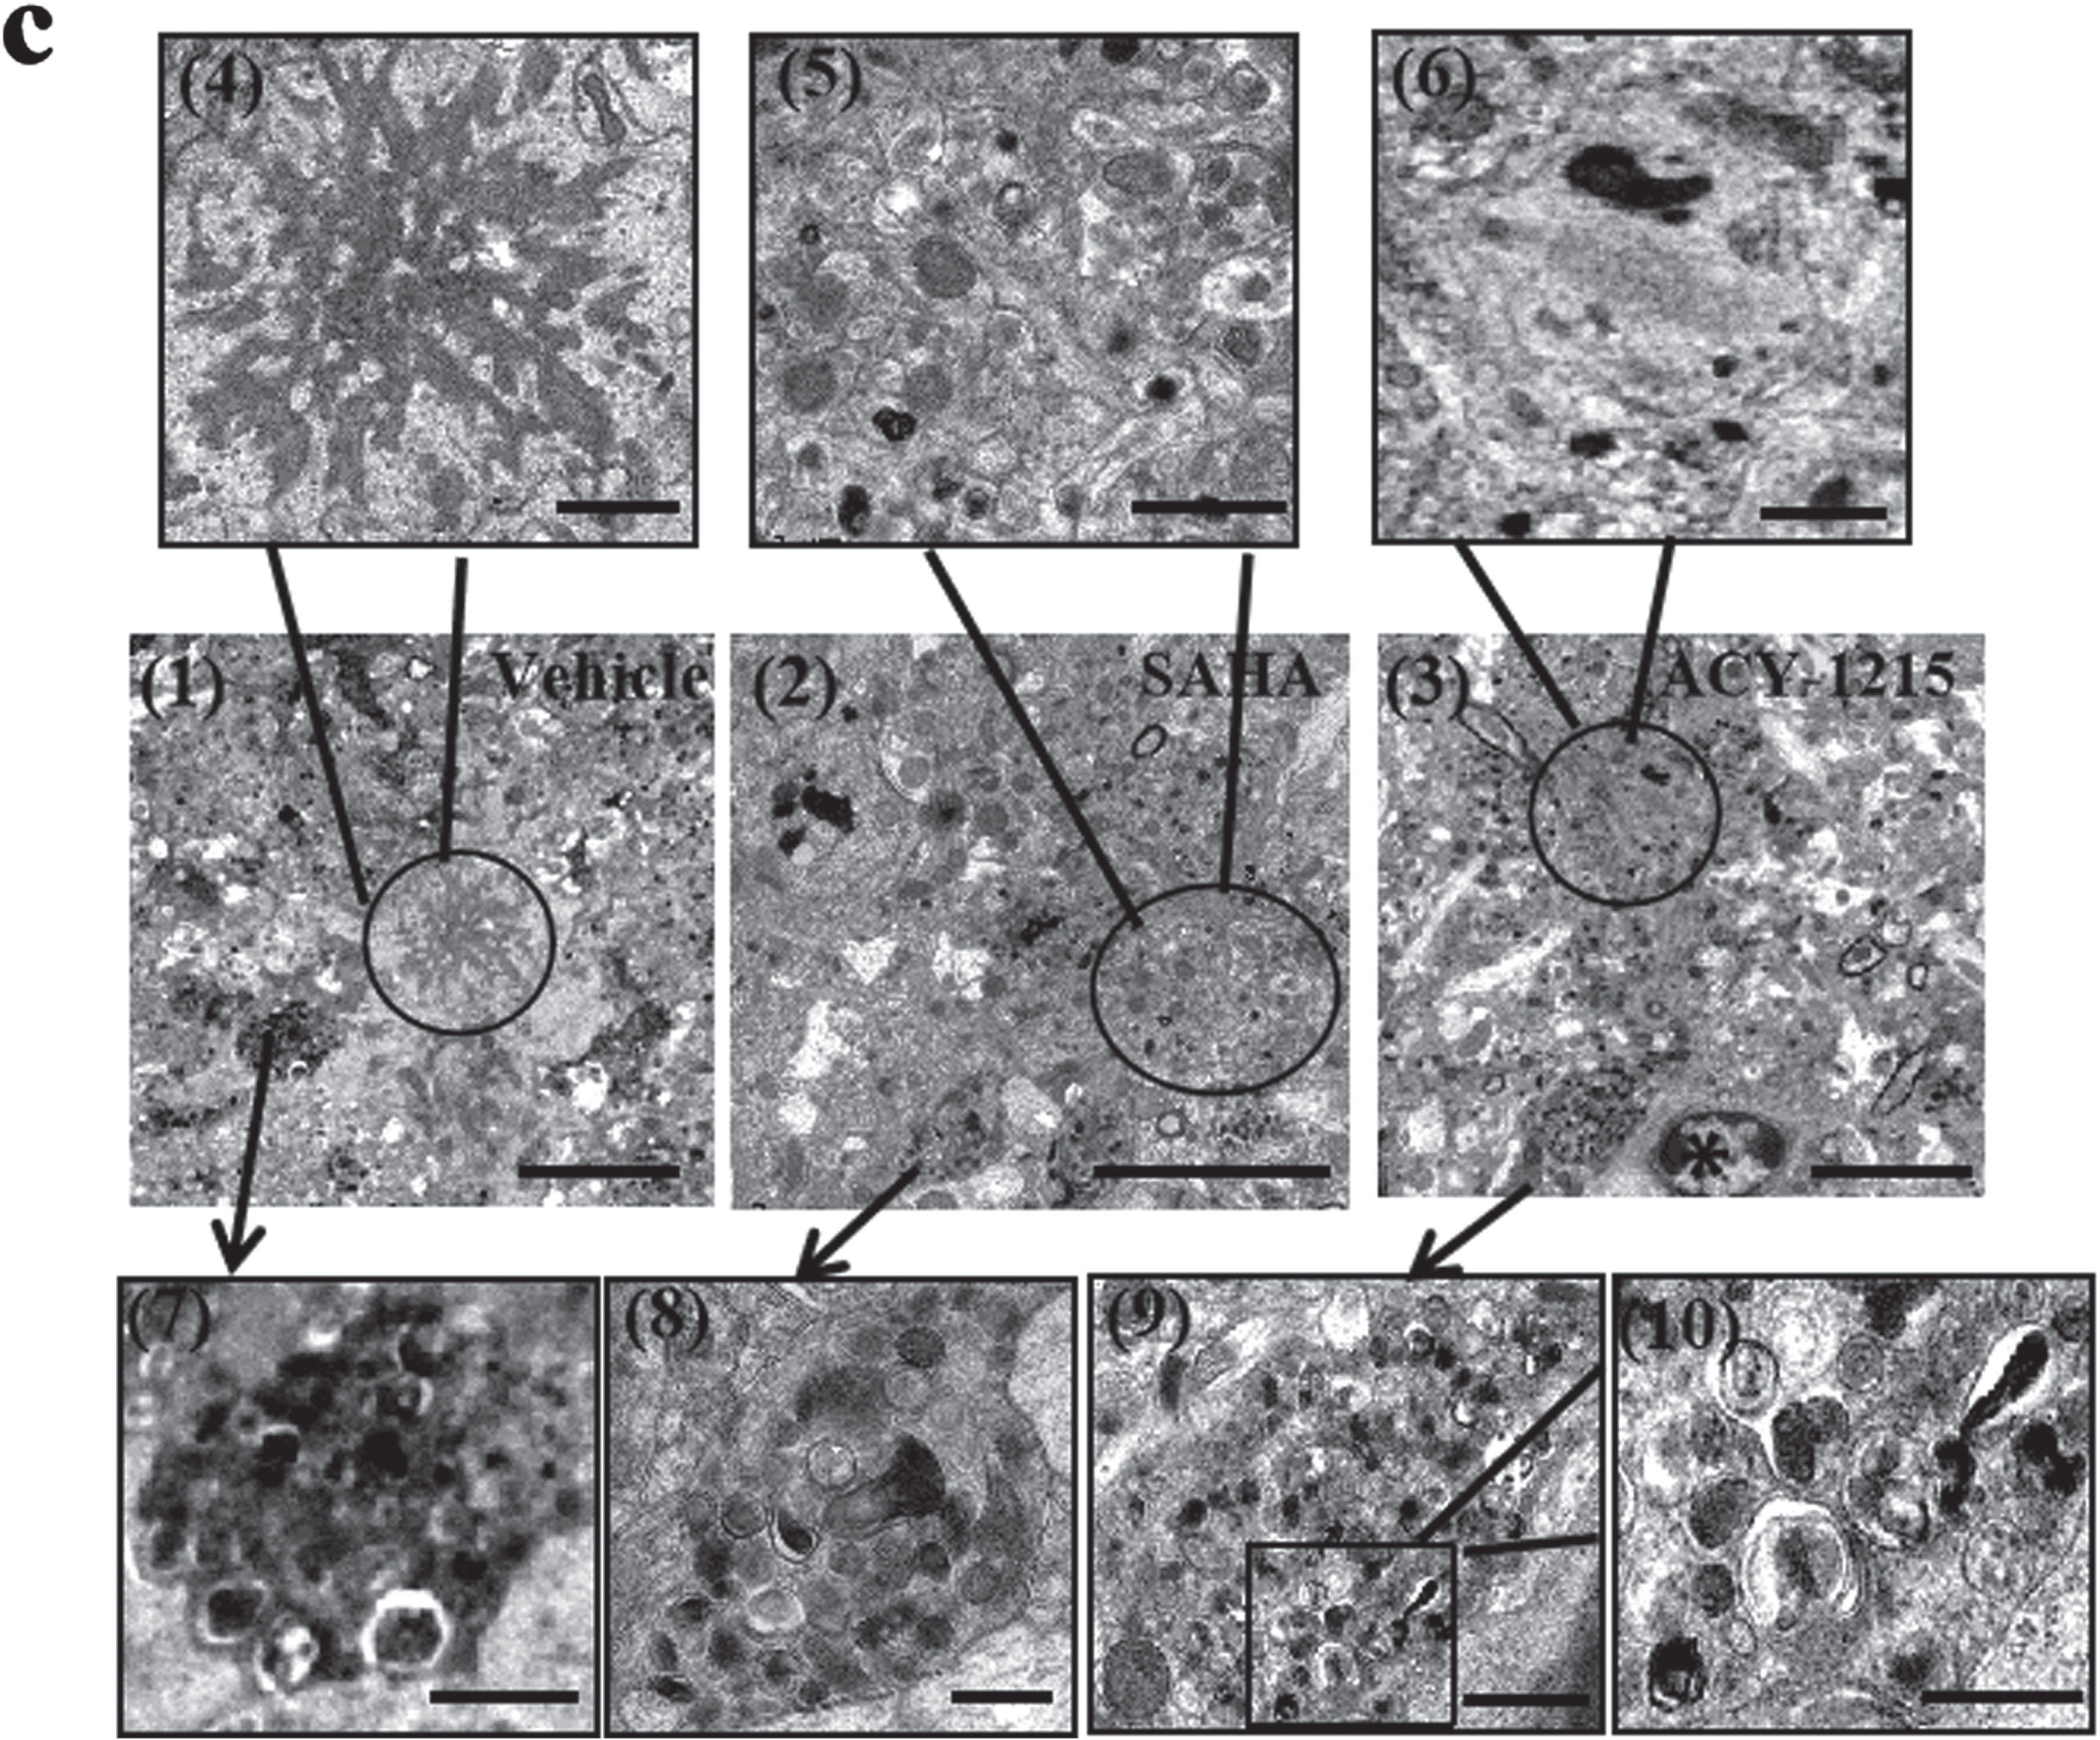 (c) Representative electron microscopy of senile plaques surrounded by dystrophic neurites, autophagic vesicles (AVs) and microglia (asterisk) in pre-frontal cortex of the three groups (vehicle, SAHA and ACY-1215). Flamelike plaque cores, present in the vehicle-treated group (1, 4), was absent in the HDAC6i-treated groups (2, 3, 5, 6). The number of AVs was reduced (7–10) and axon degeneration (2, 3) was improved in the HDACi-treated groups (n = 3). Scale bar: 5 μm (1, 2, 3); 1 μm (4–9); 500 nm (10).